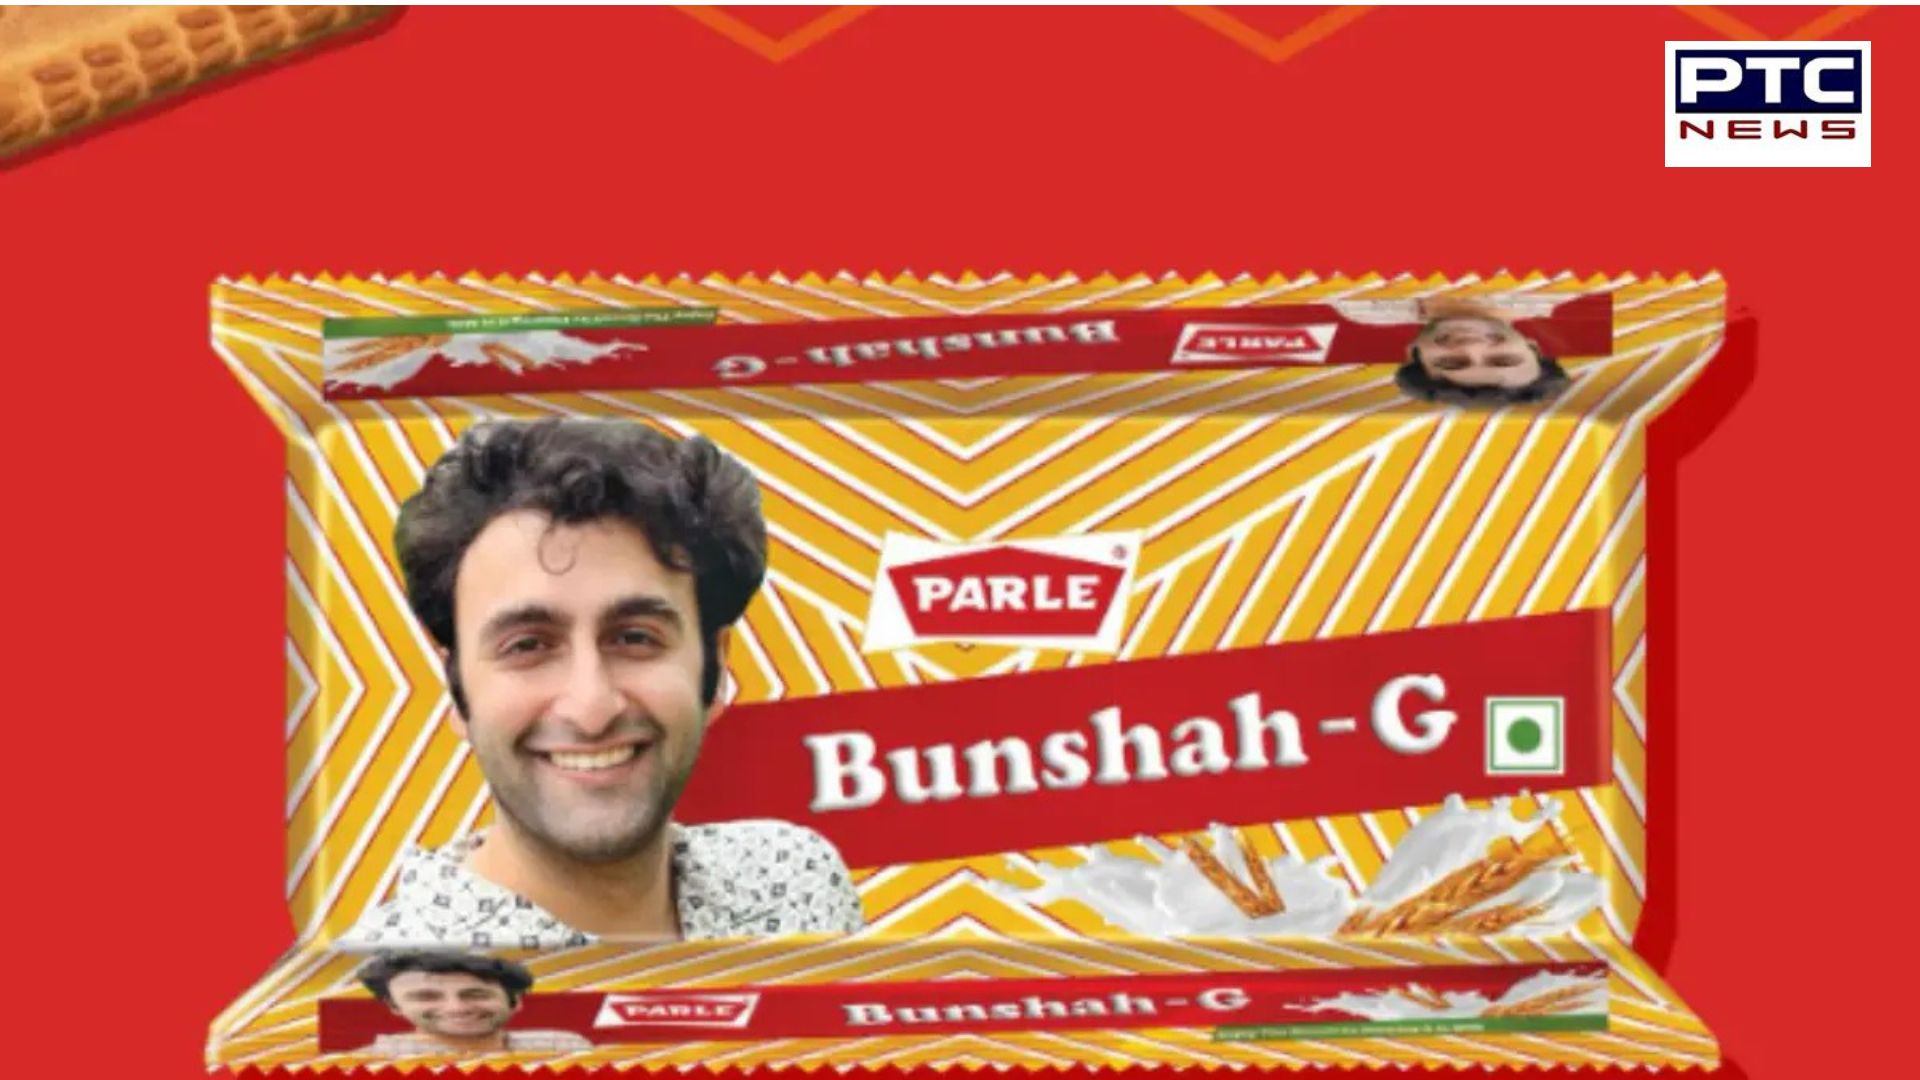 Now, this influencer's face graces Parle-G; Internet buzz